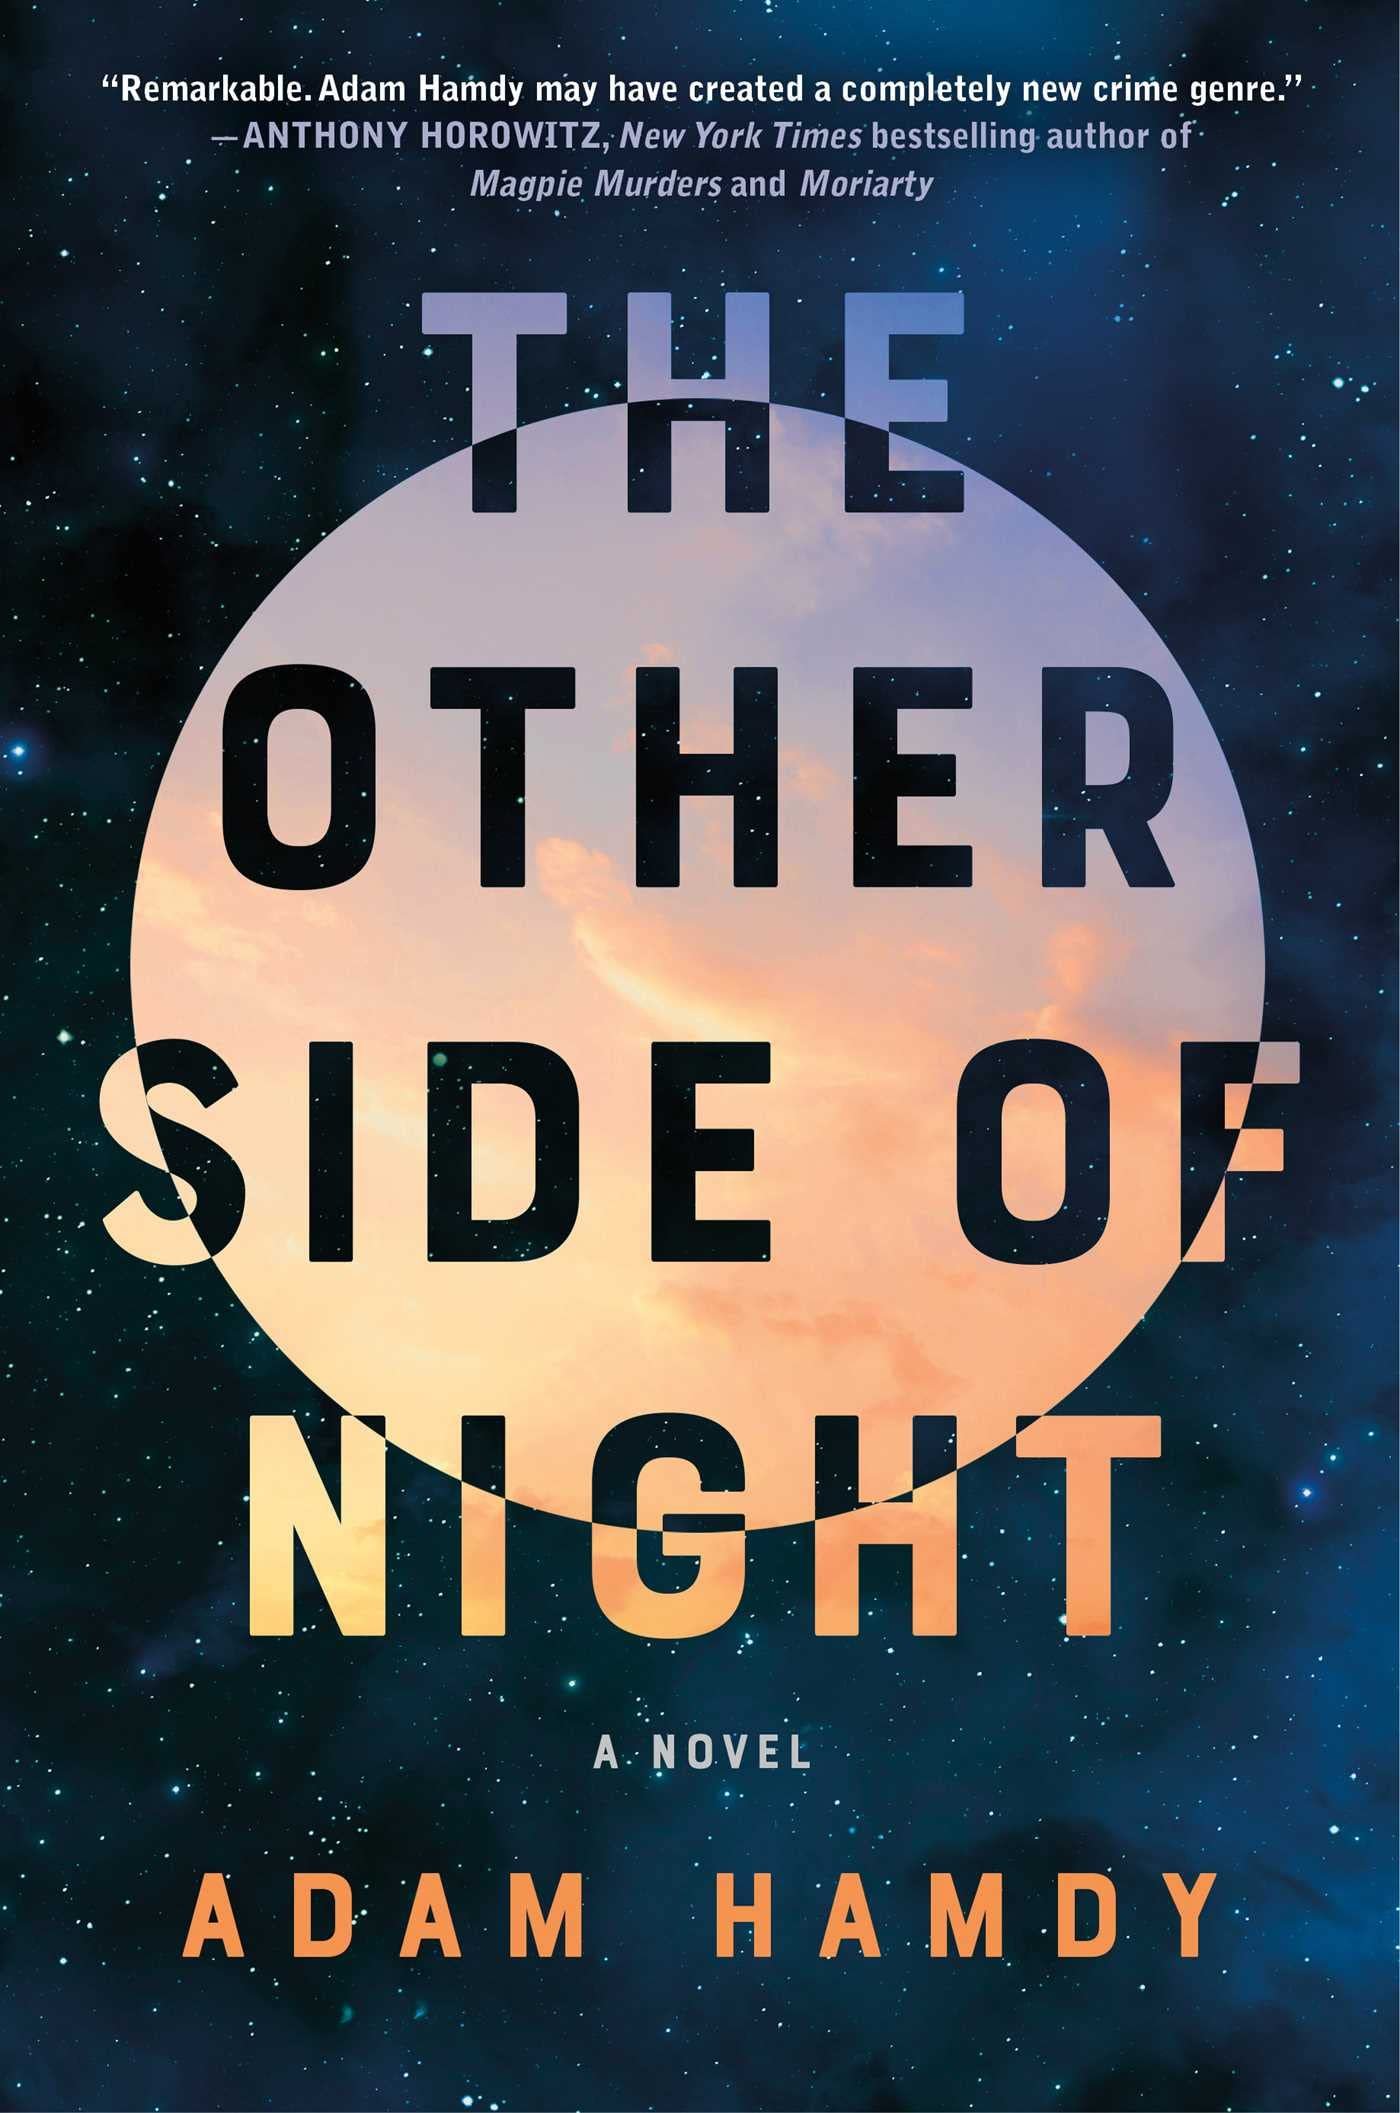 A Virtual Evening with Adam Hamdy and James Patterson The Other Side of Night — Midtown Scholar Bookstore-Cafe